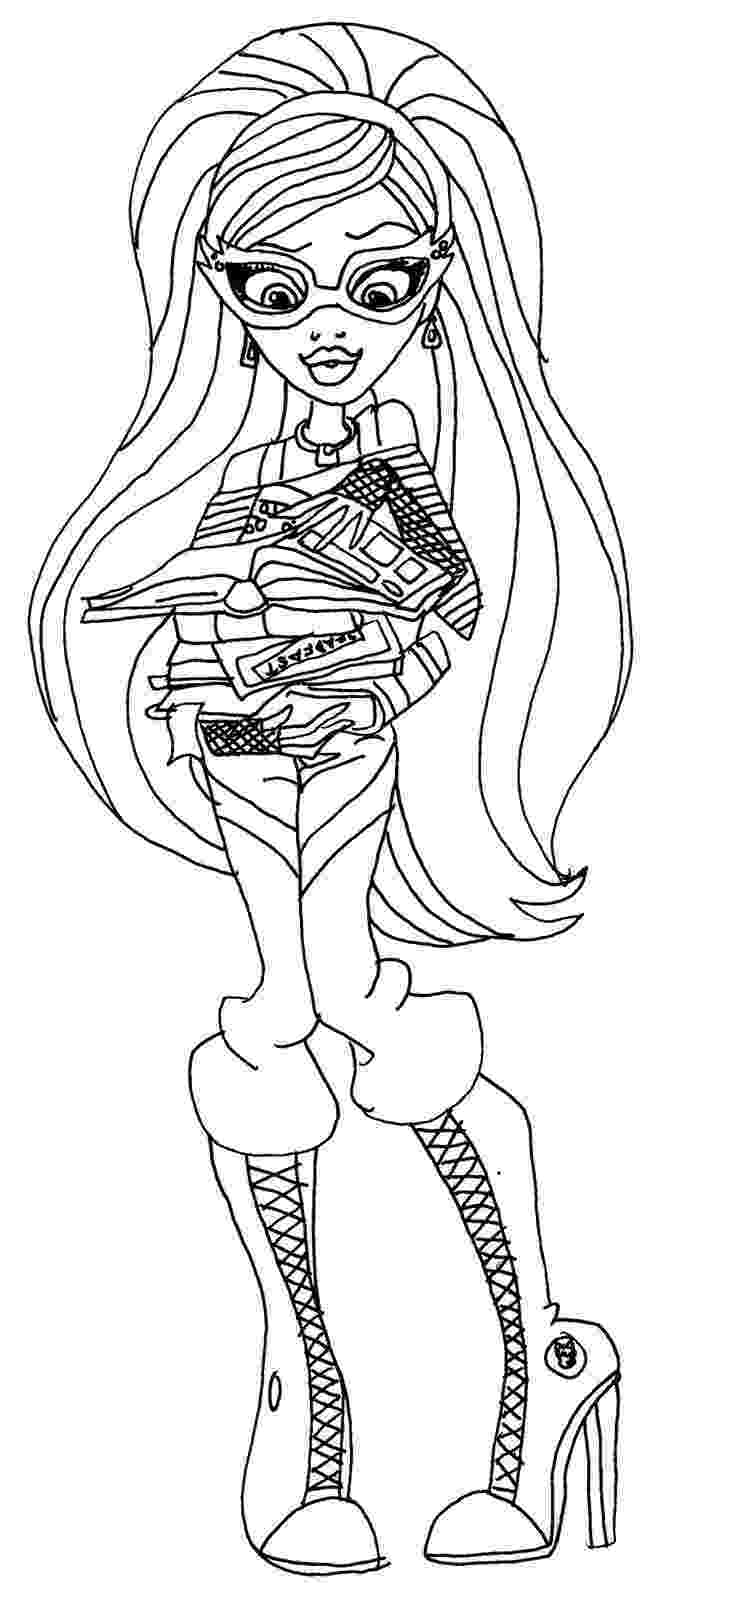 monster high coloring page coloring pages monster high coloring pages free and printable monster high coloring page 